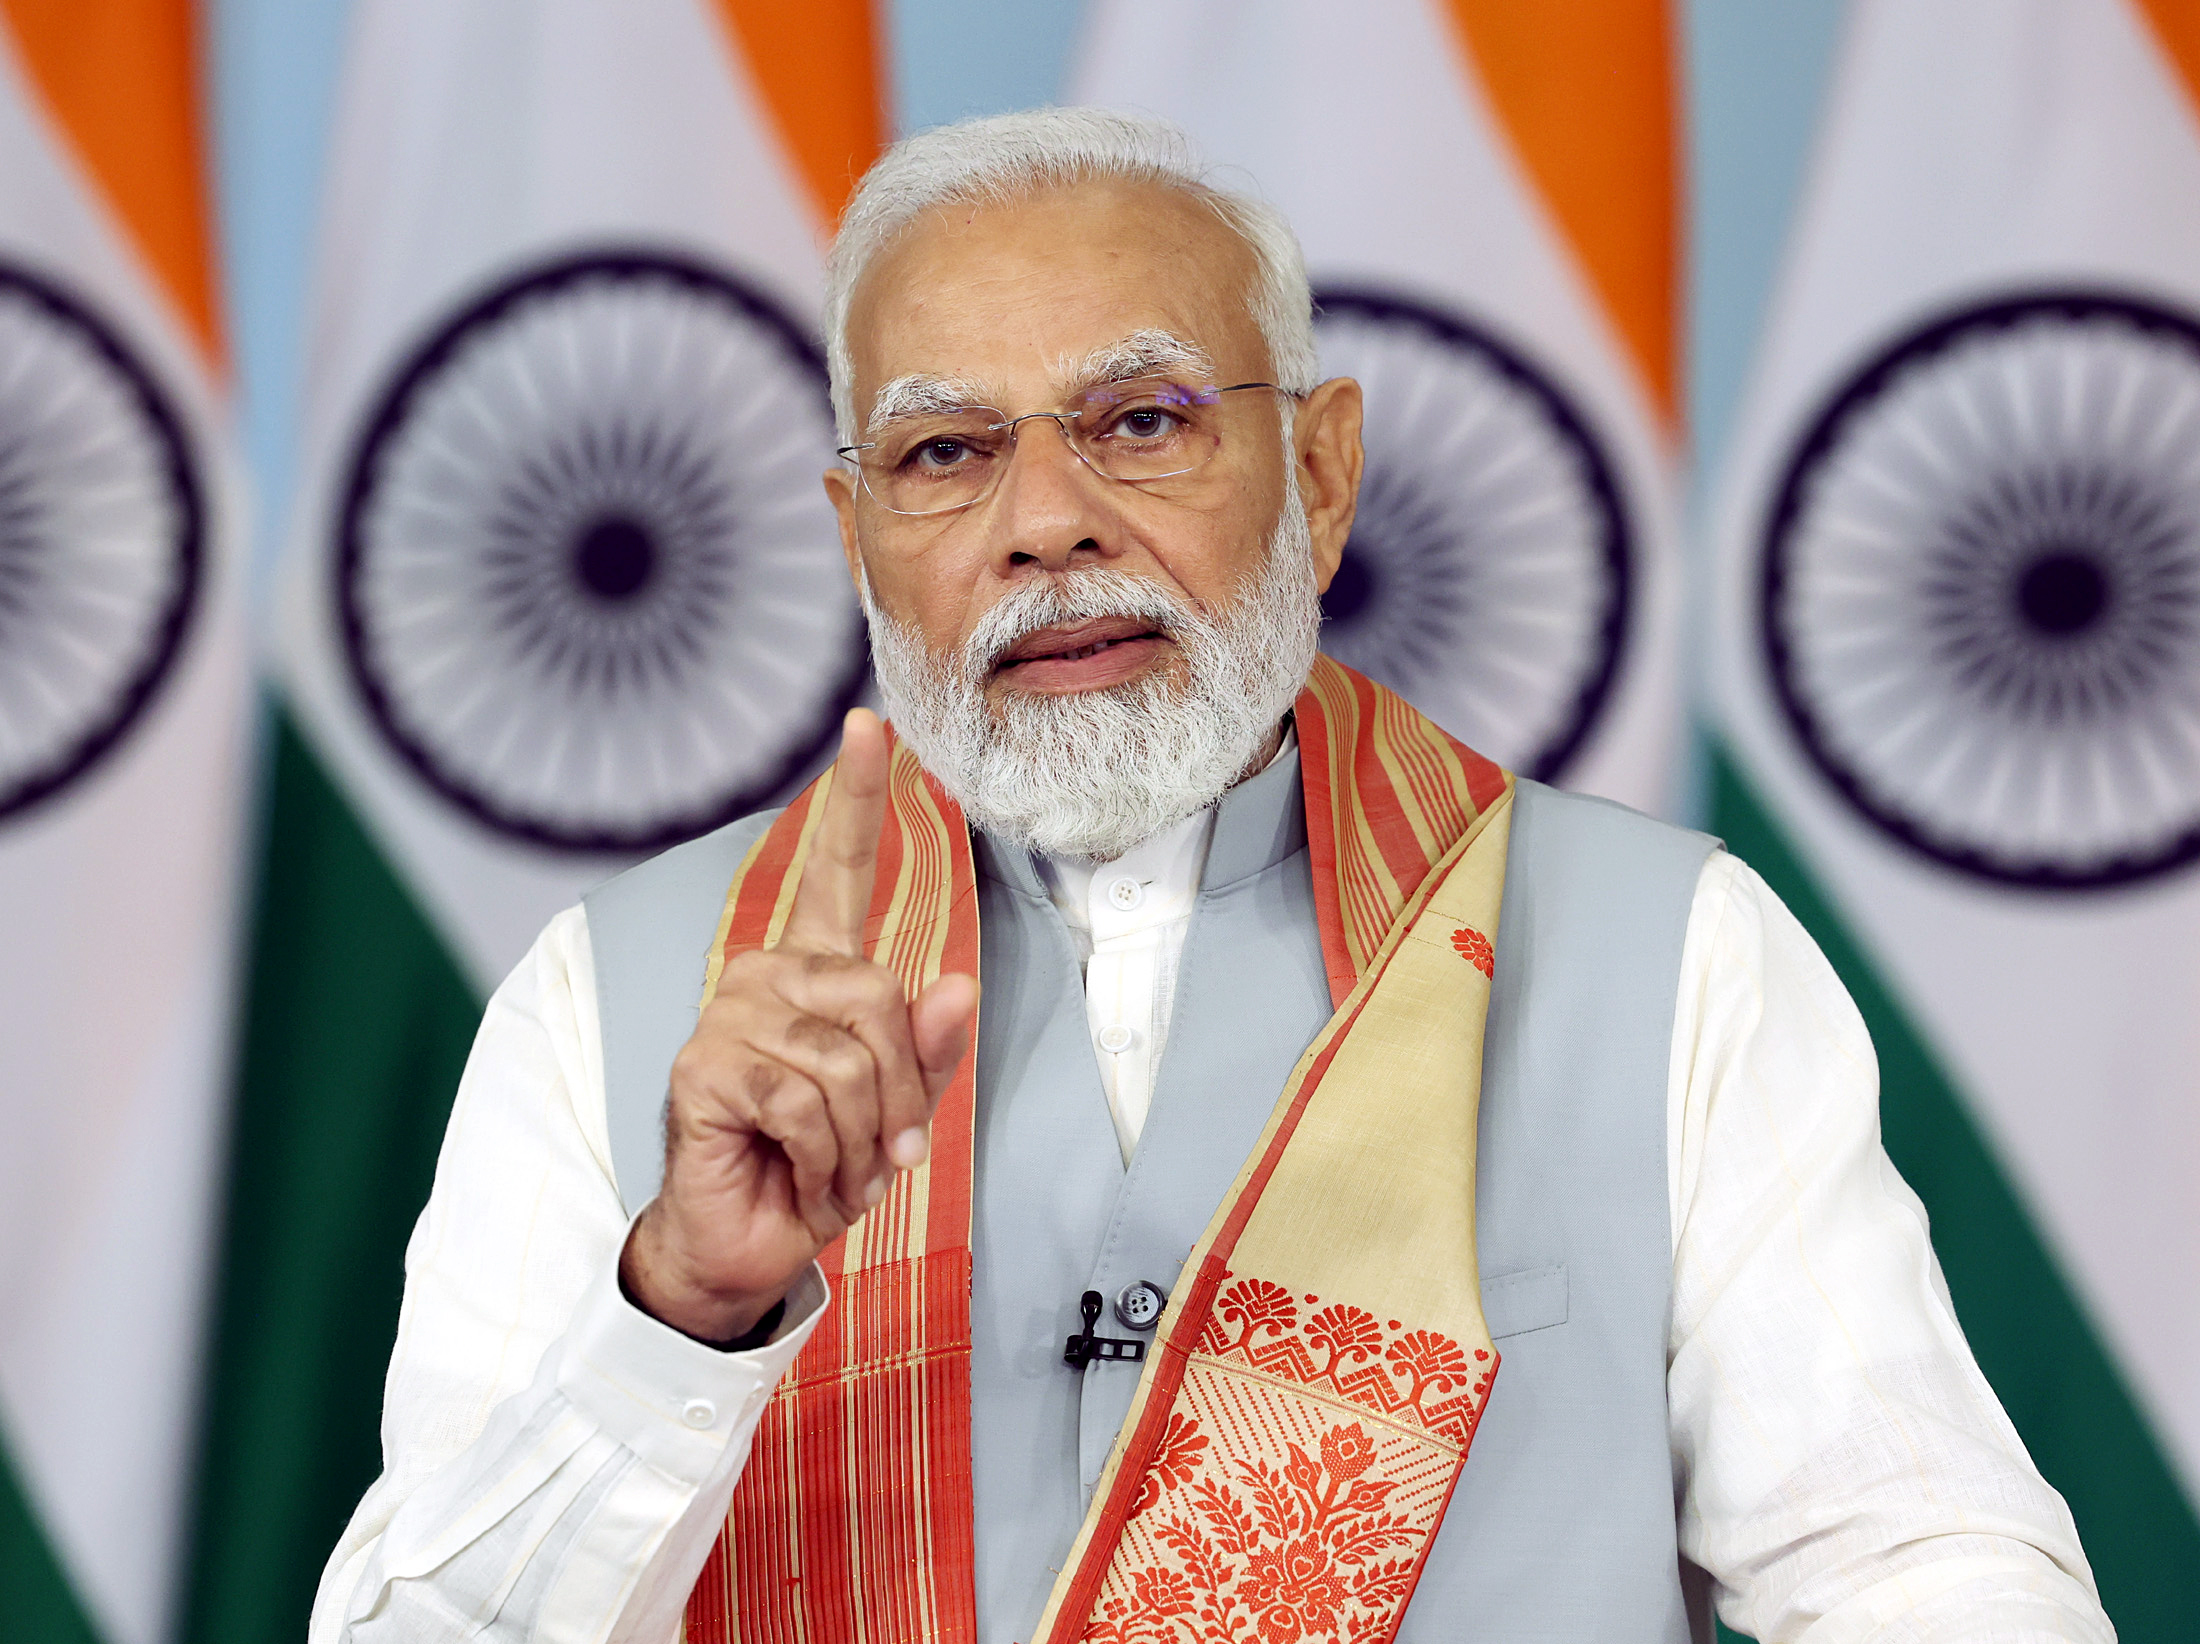 9 years of BJP-led govt dedicated to people: PM Modi